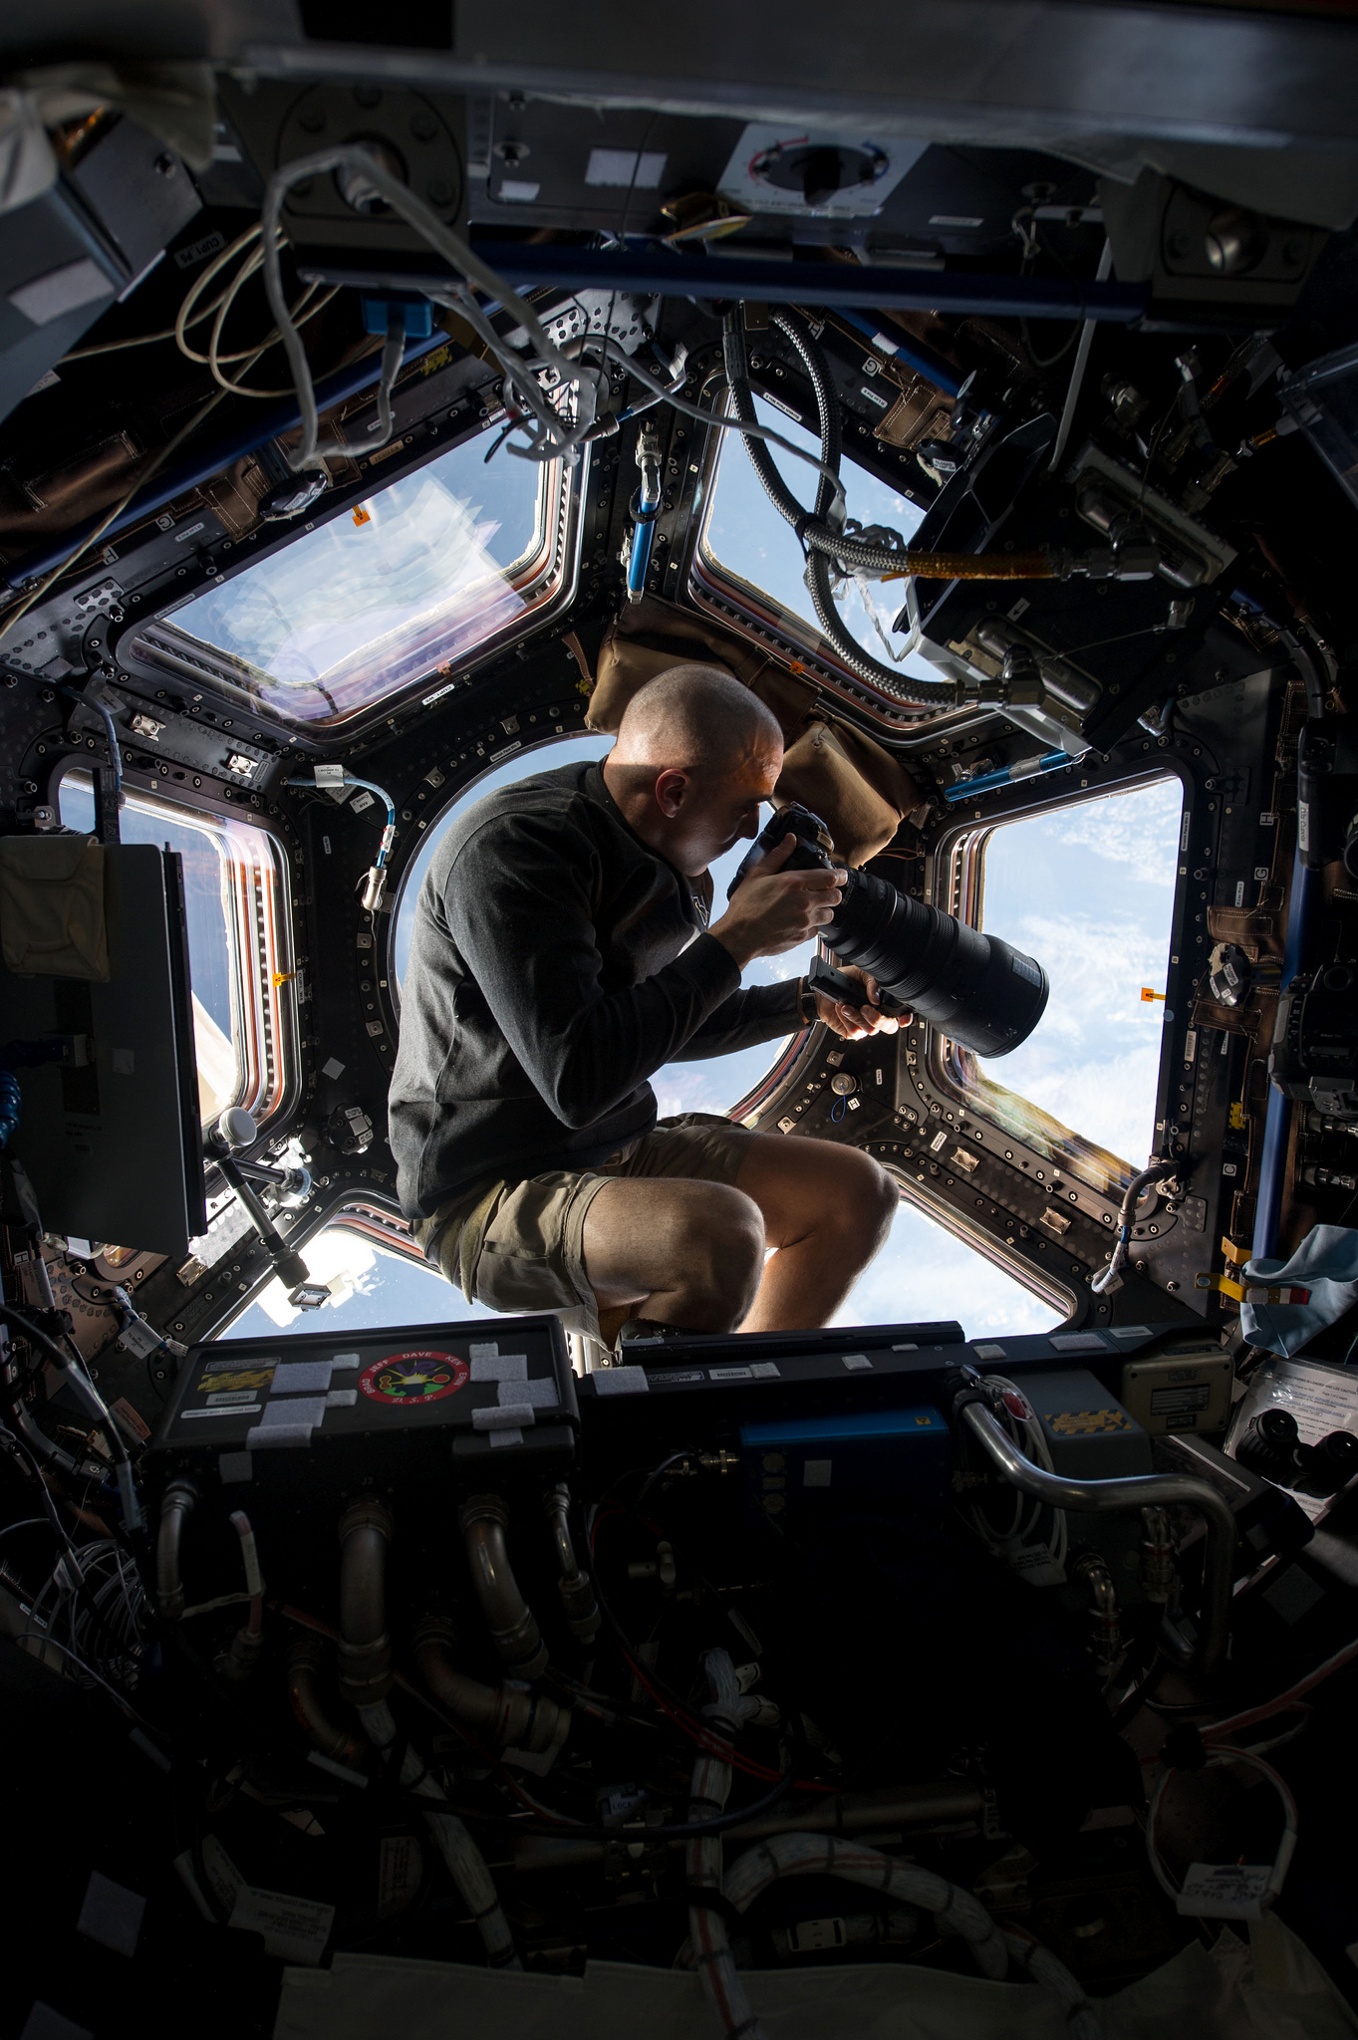 From the cupola, Chris Cassidy, an Expedition 36 flight engineer, uses a 400mm lens on a digital still camera to photograph Earth, some 250 miles below him, and the International Space Station